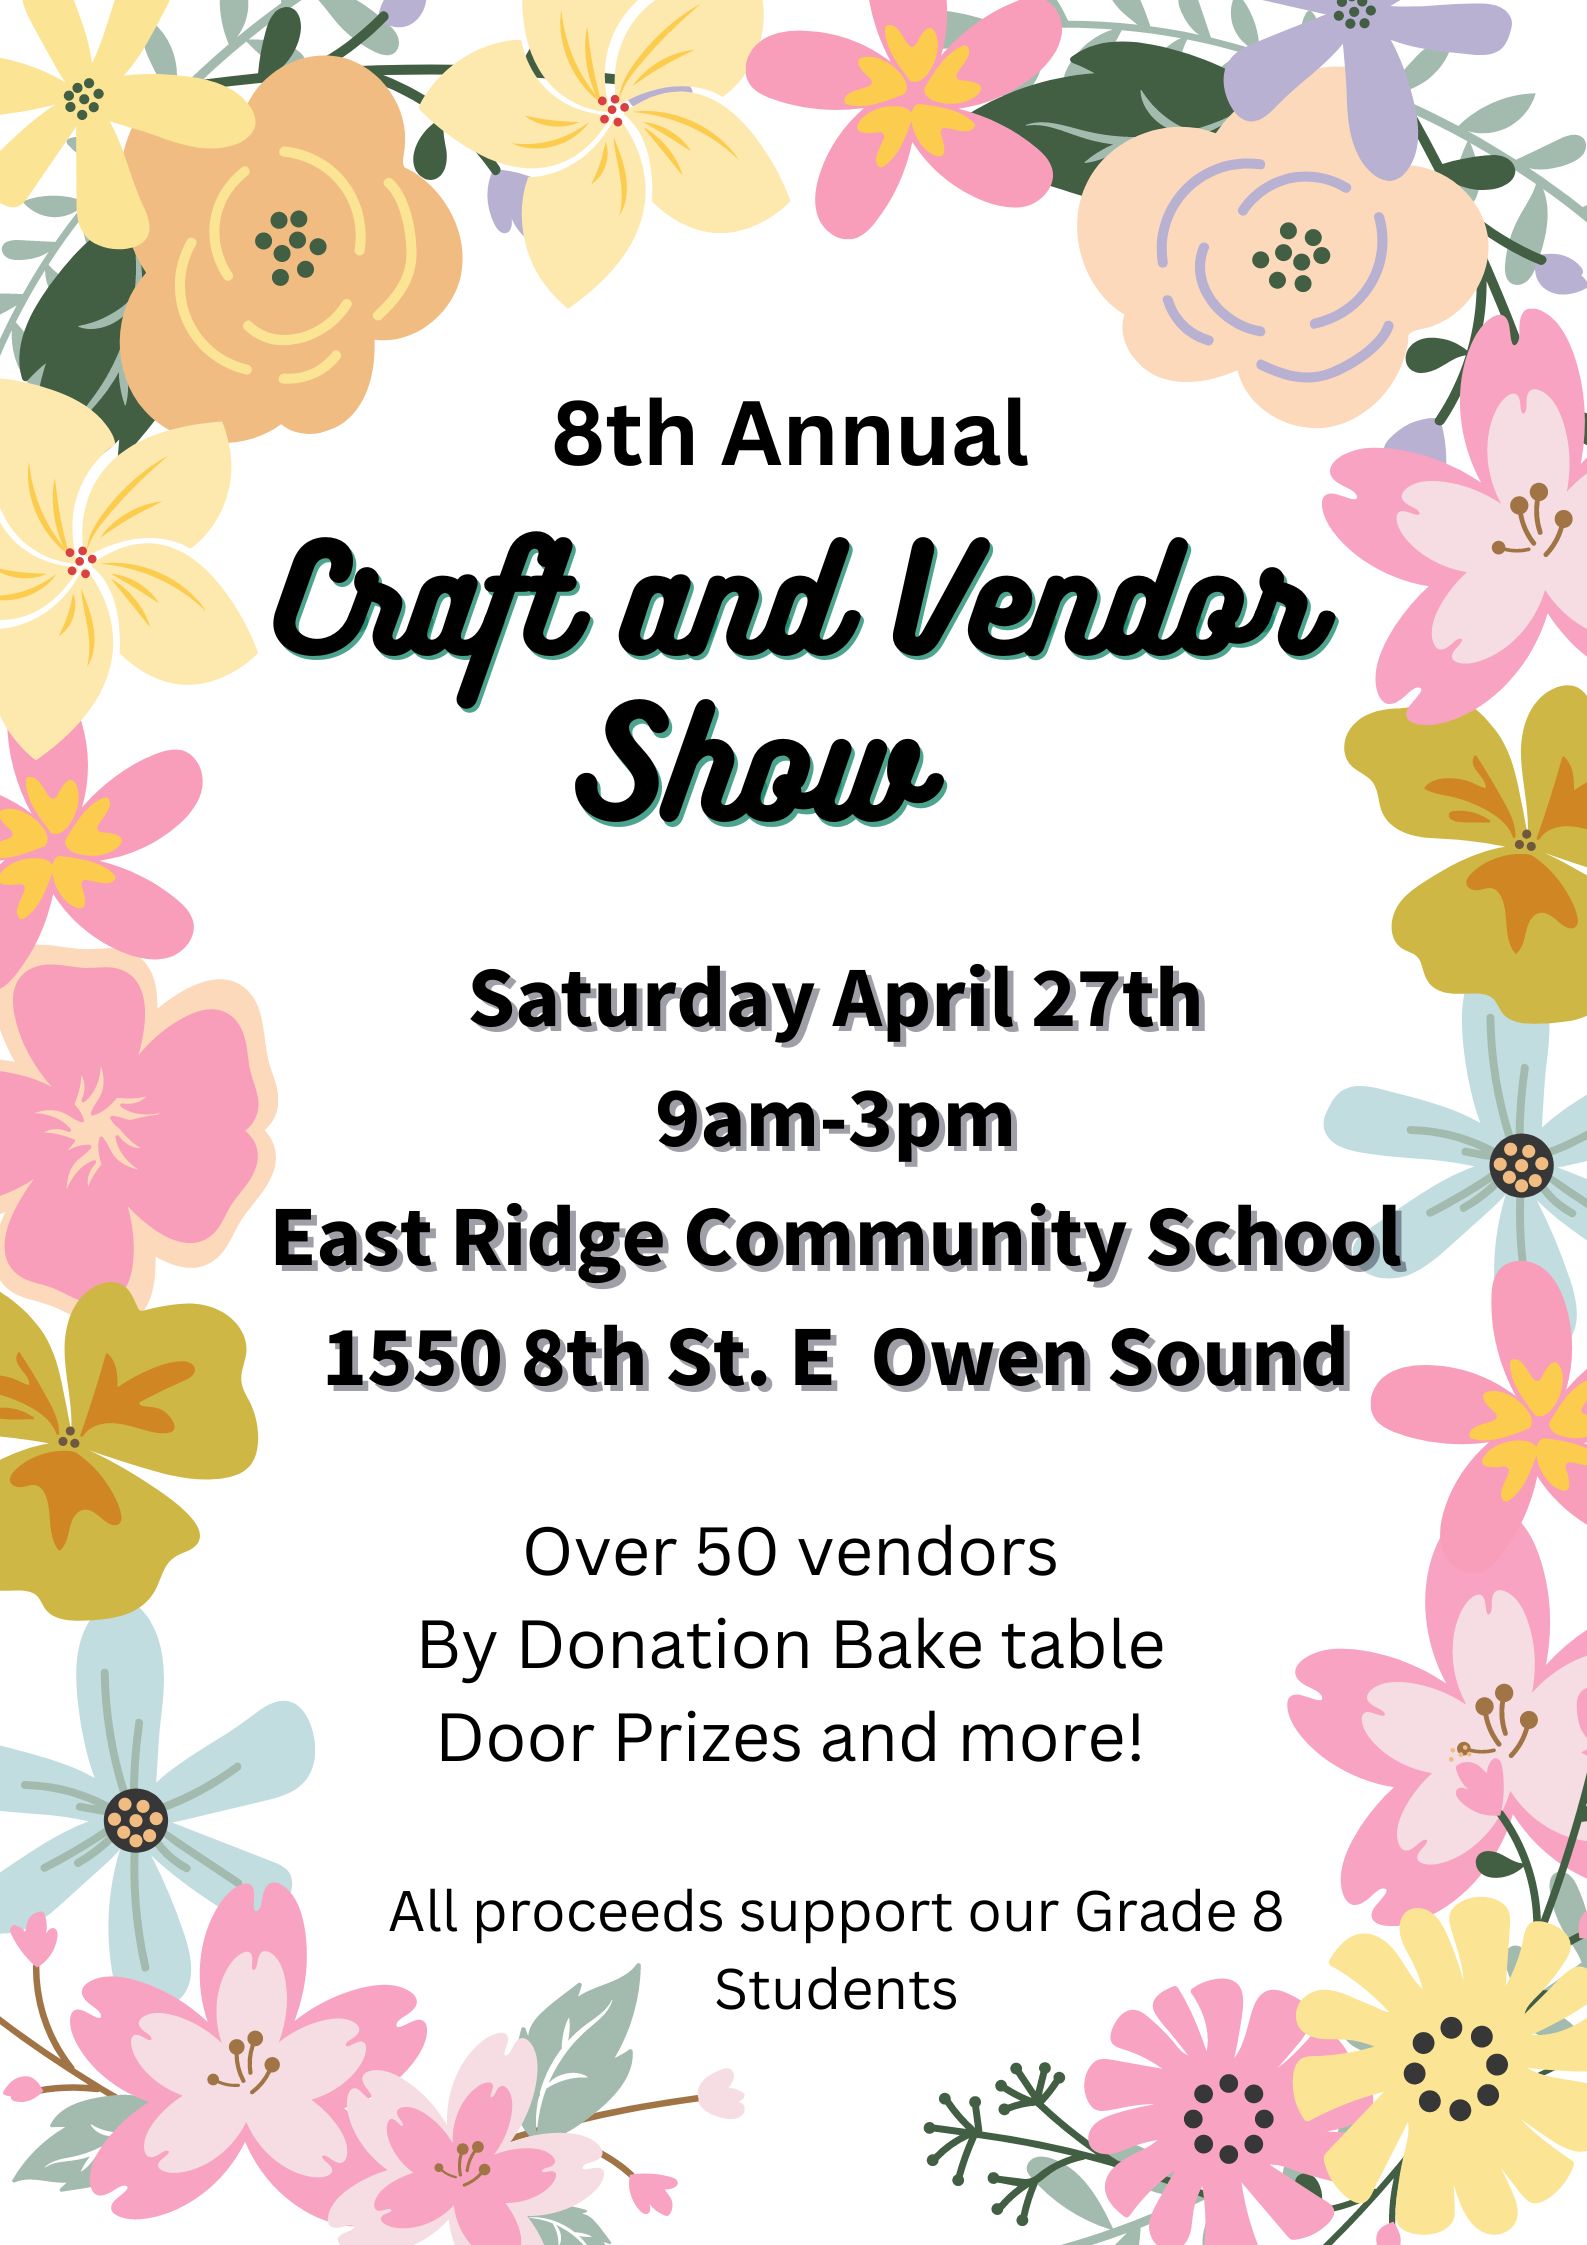 Event image 8th Annual Spring Craft and Vendor Show @ East Ridge Community School in Owen Sound